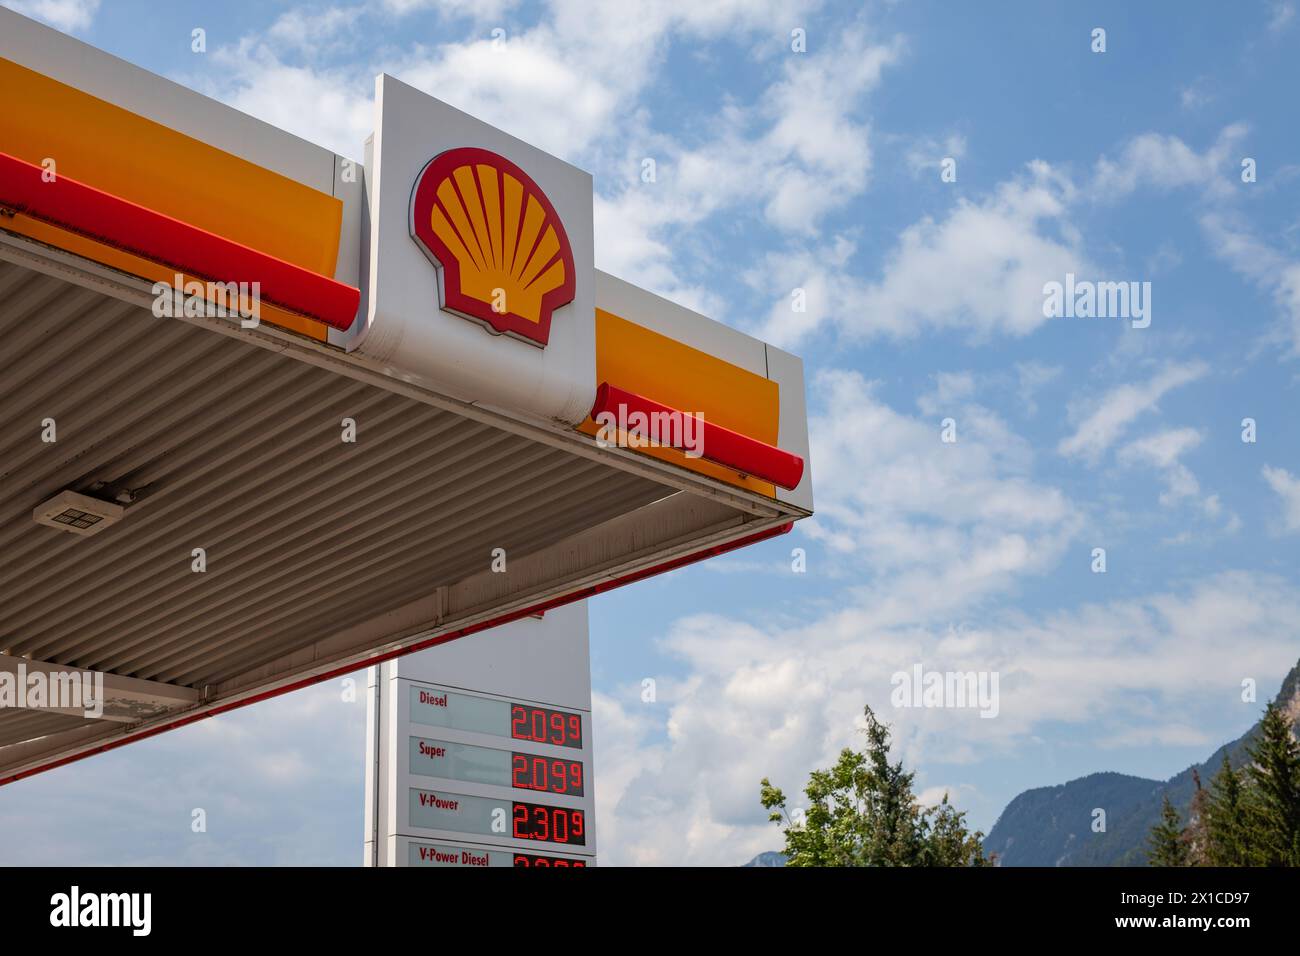 Shell gas station canopy and price board against a cloudy sky in Austria. Stock Photo